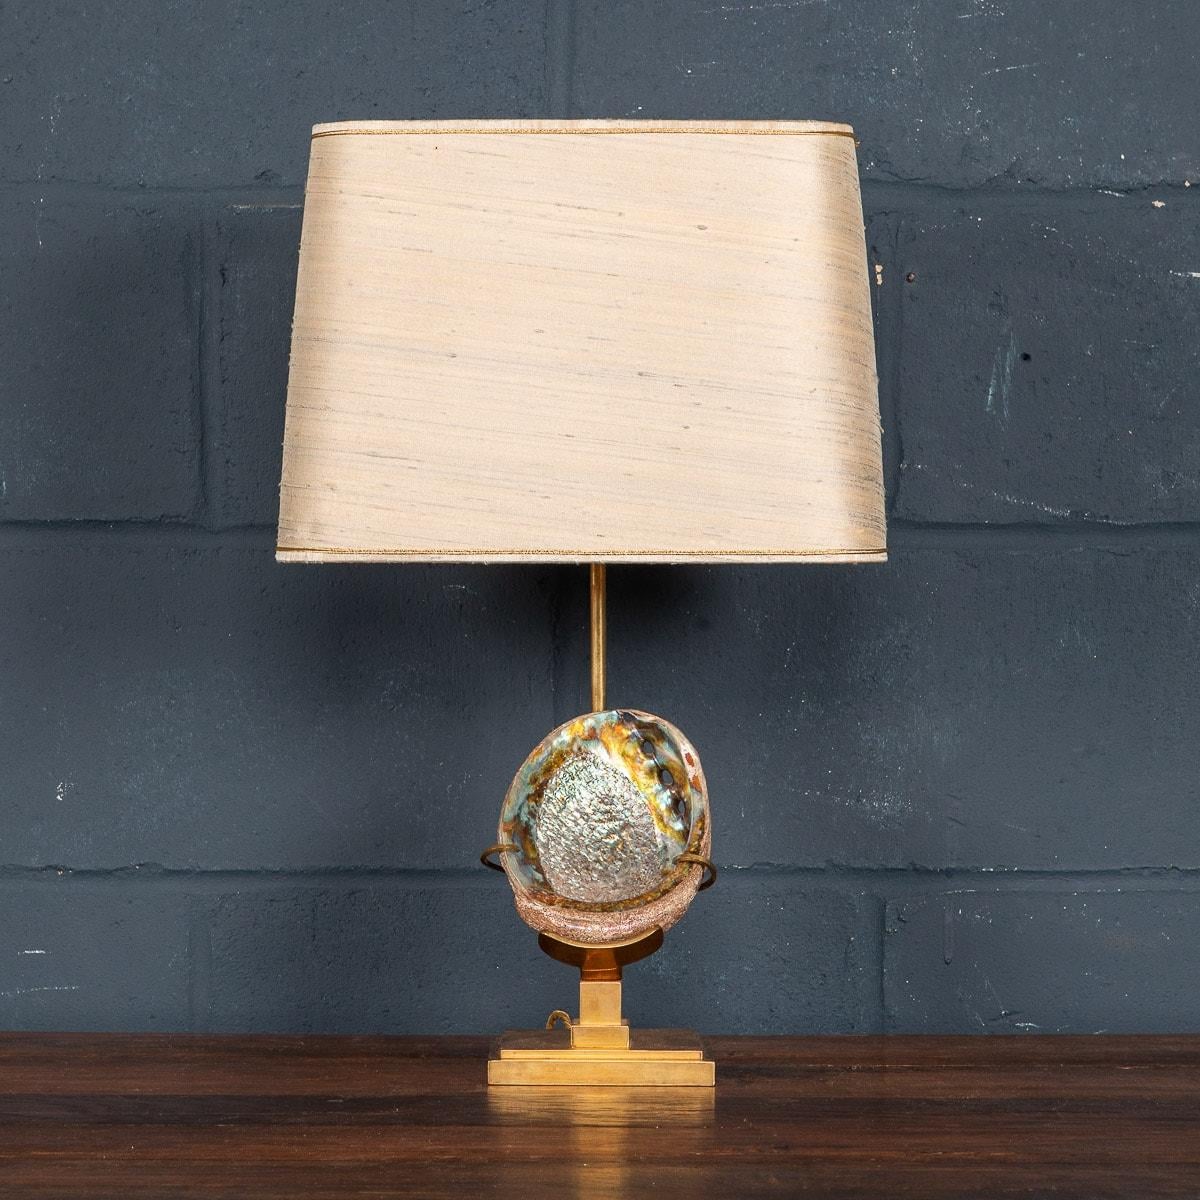 A very rare table lamp (or abat-jour) made by the famous Belgian designer Willy Daro around the late 1960s. The brass lamp base incorporates an abalone shell to the middle. The highly iridescent inner nacre layer of the shell of abalone has